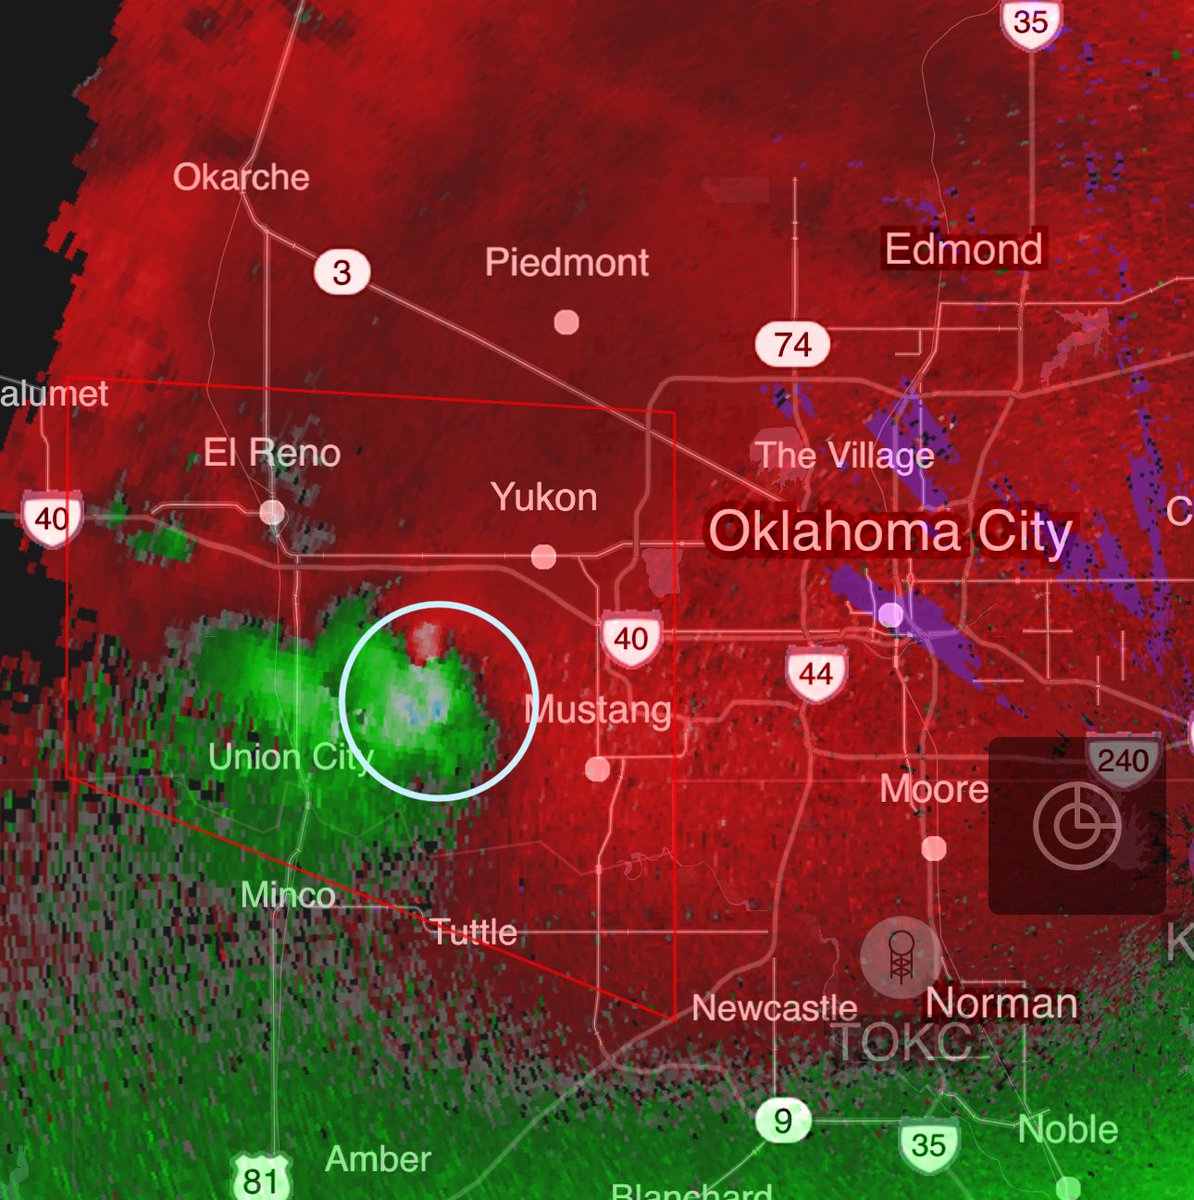 NEW: Confirmed #tornado entering the west side of the greater OKC metro! Circulation could pass anywhere from near Yukon to Mustang, and is exhibiting tendencies for deviant motion. Seek shelter NOW.